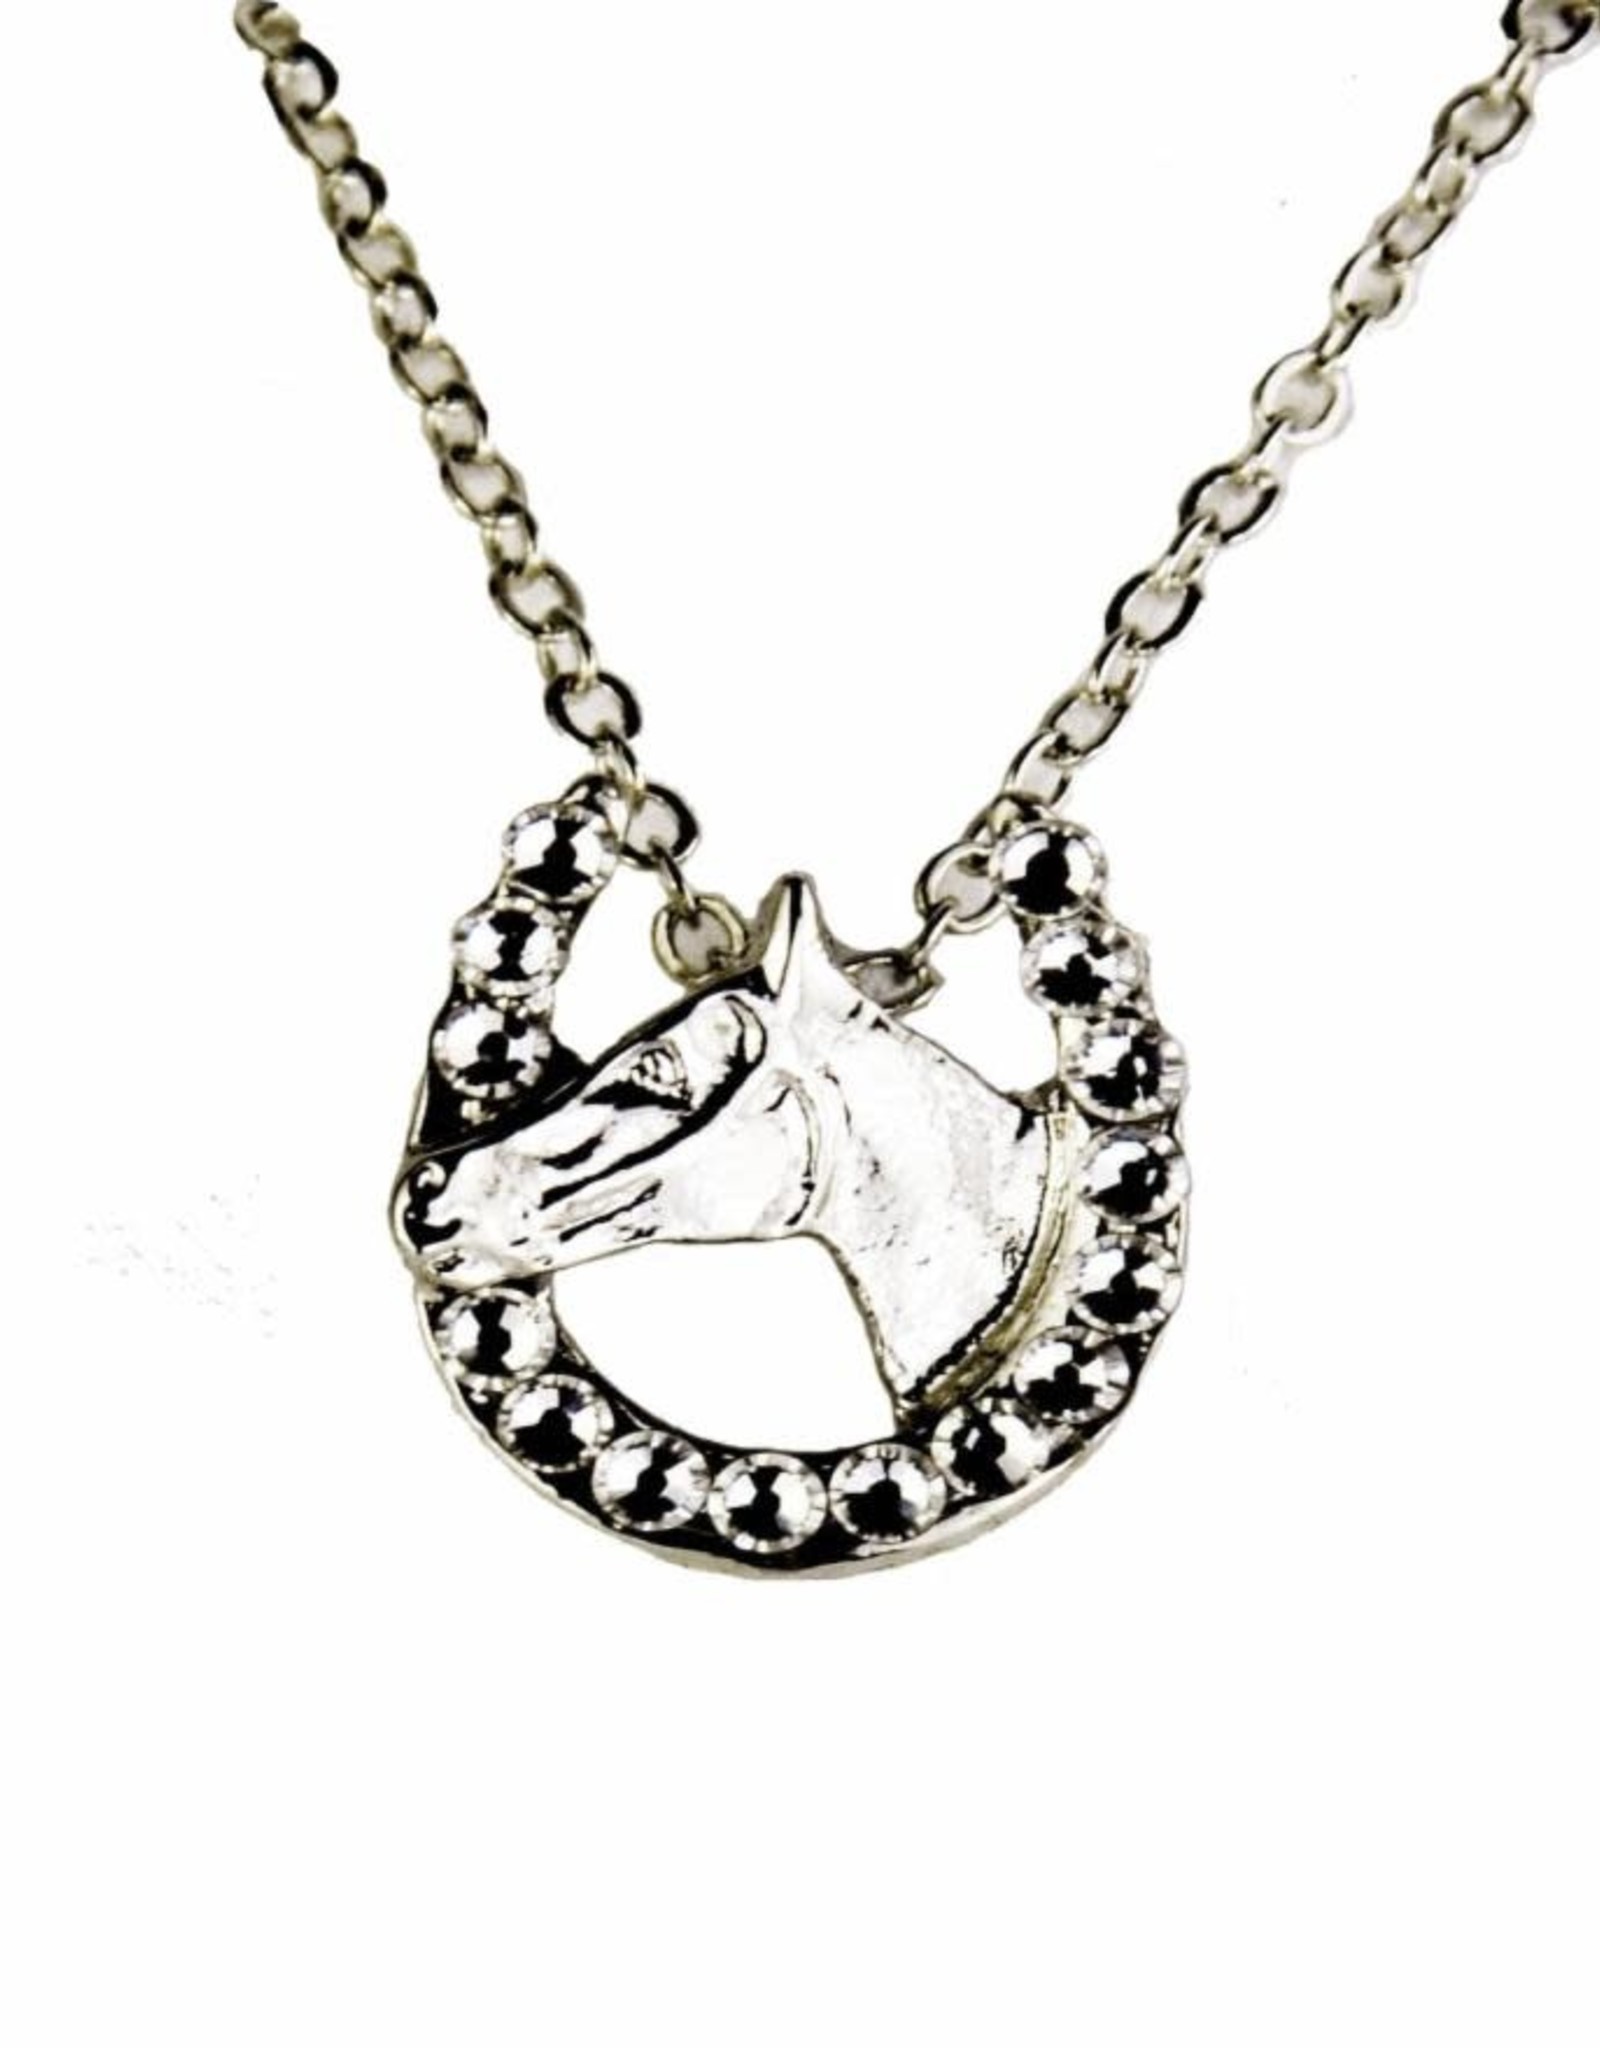 Necklace w/ horse head in horse shoe